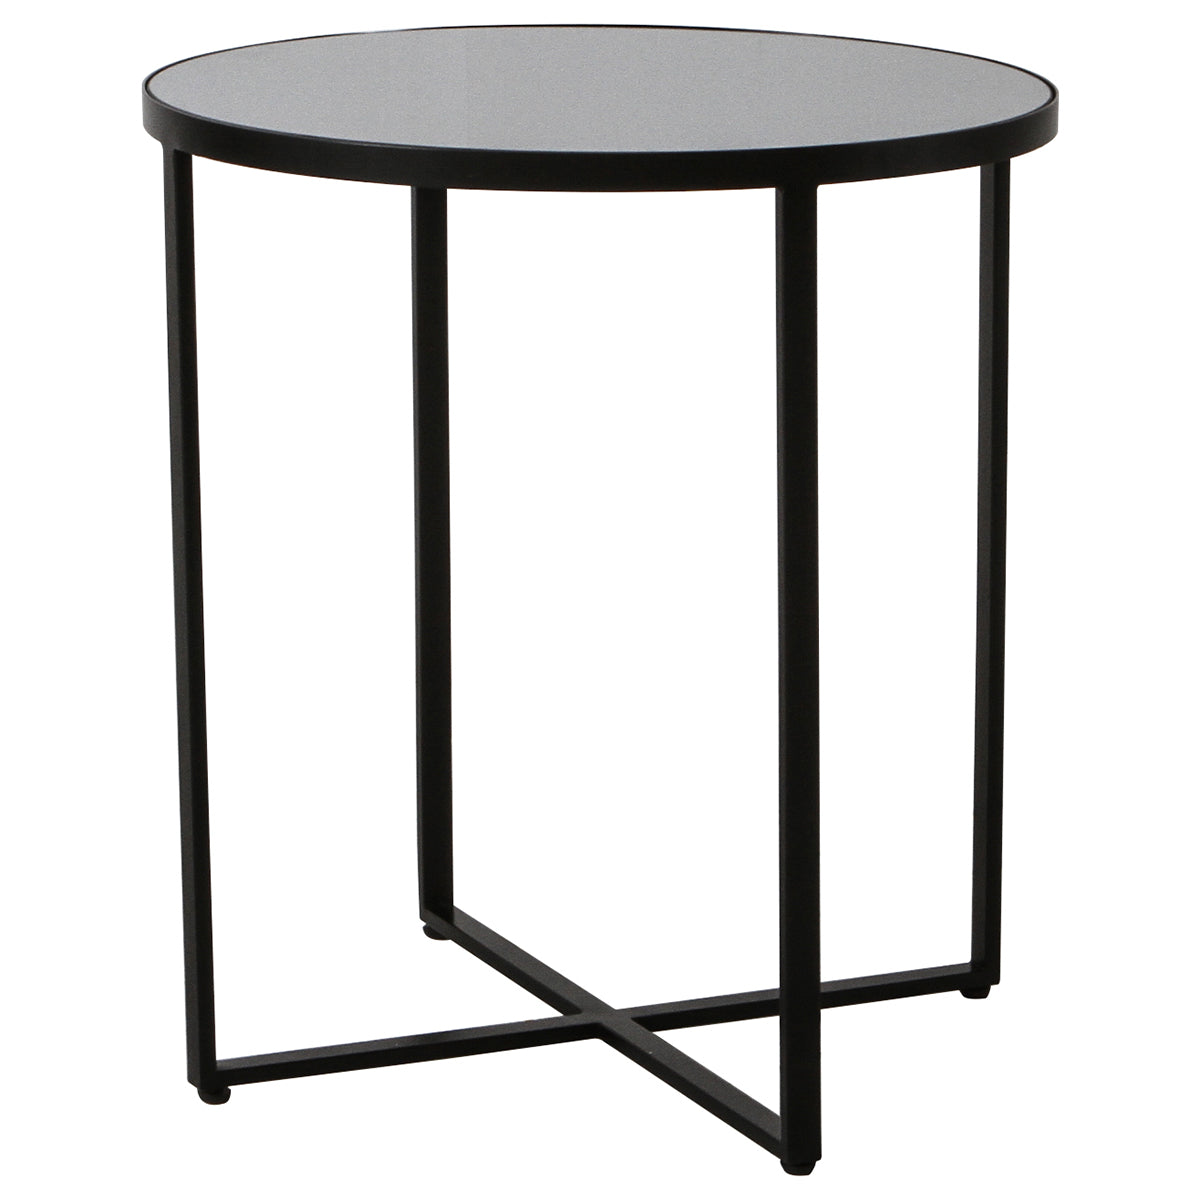 A Torrance Side Table with a glass top for interior decor or home furniture from Kikiathome.co.uk.